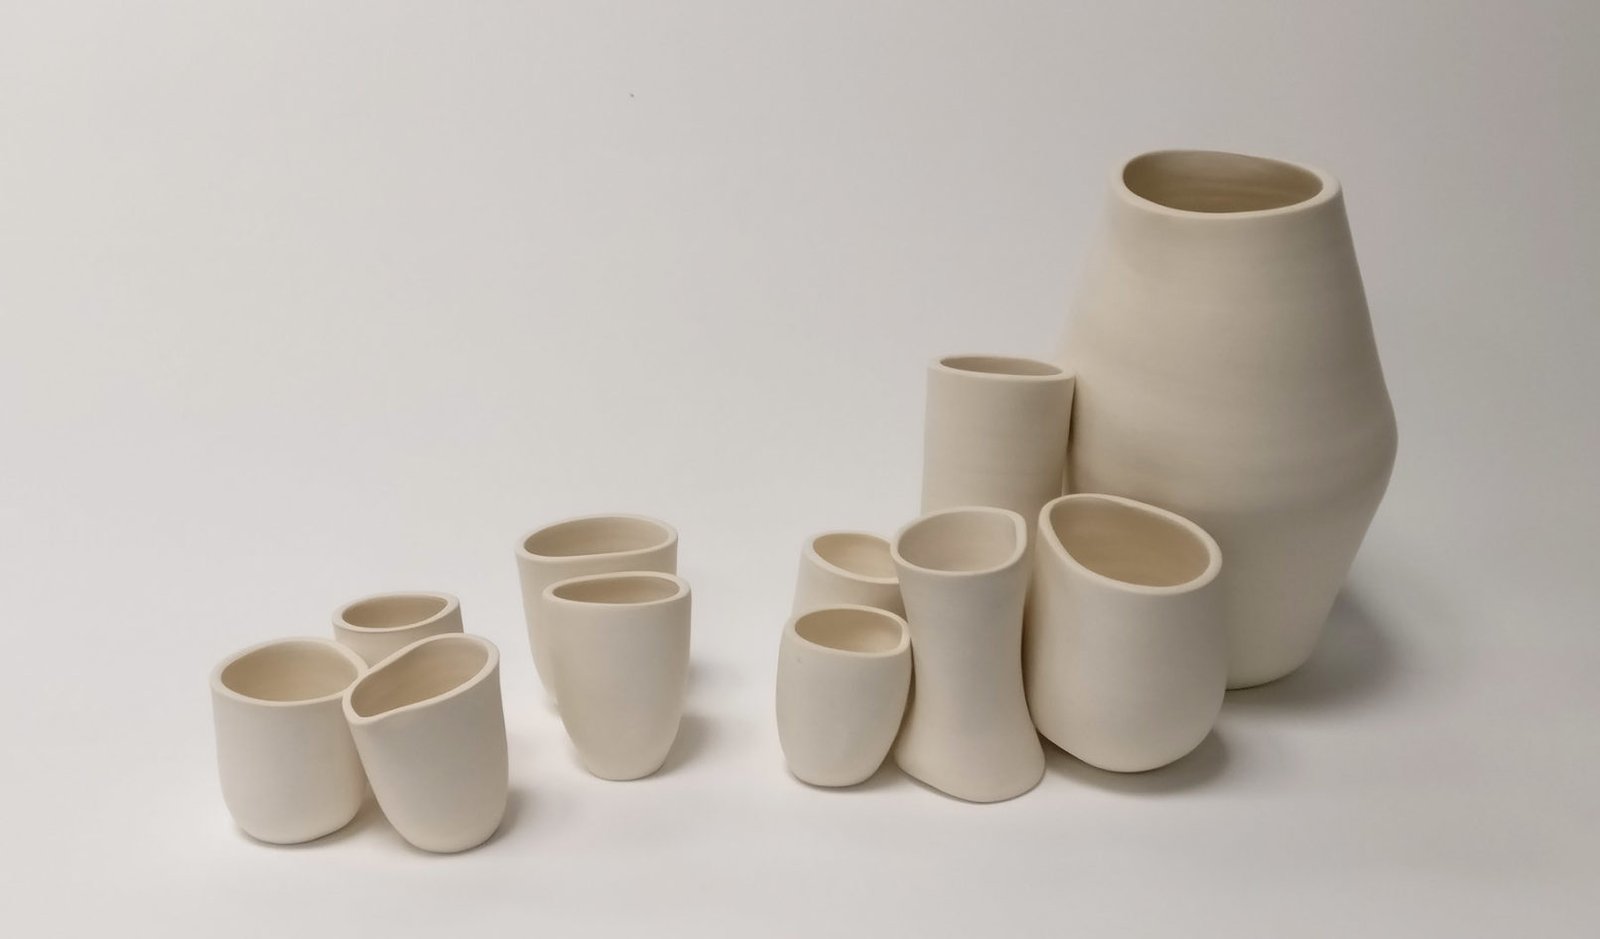 Szilvia Gyorgy, Imprinted Vessels, porcelain 24 times 28 times 18 cm three separate works), 2017